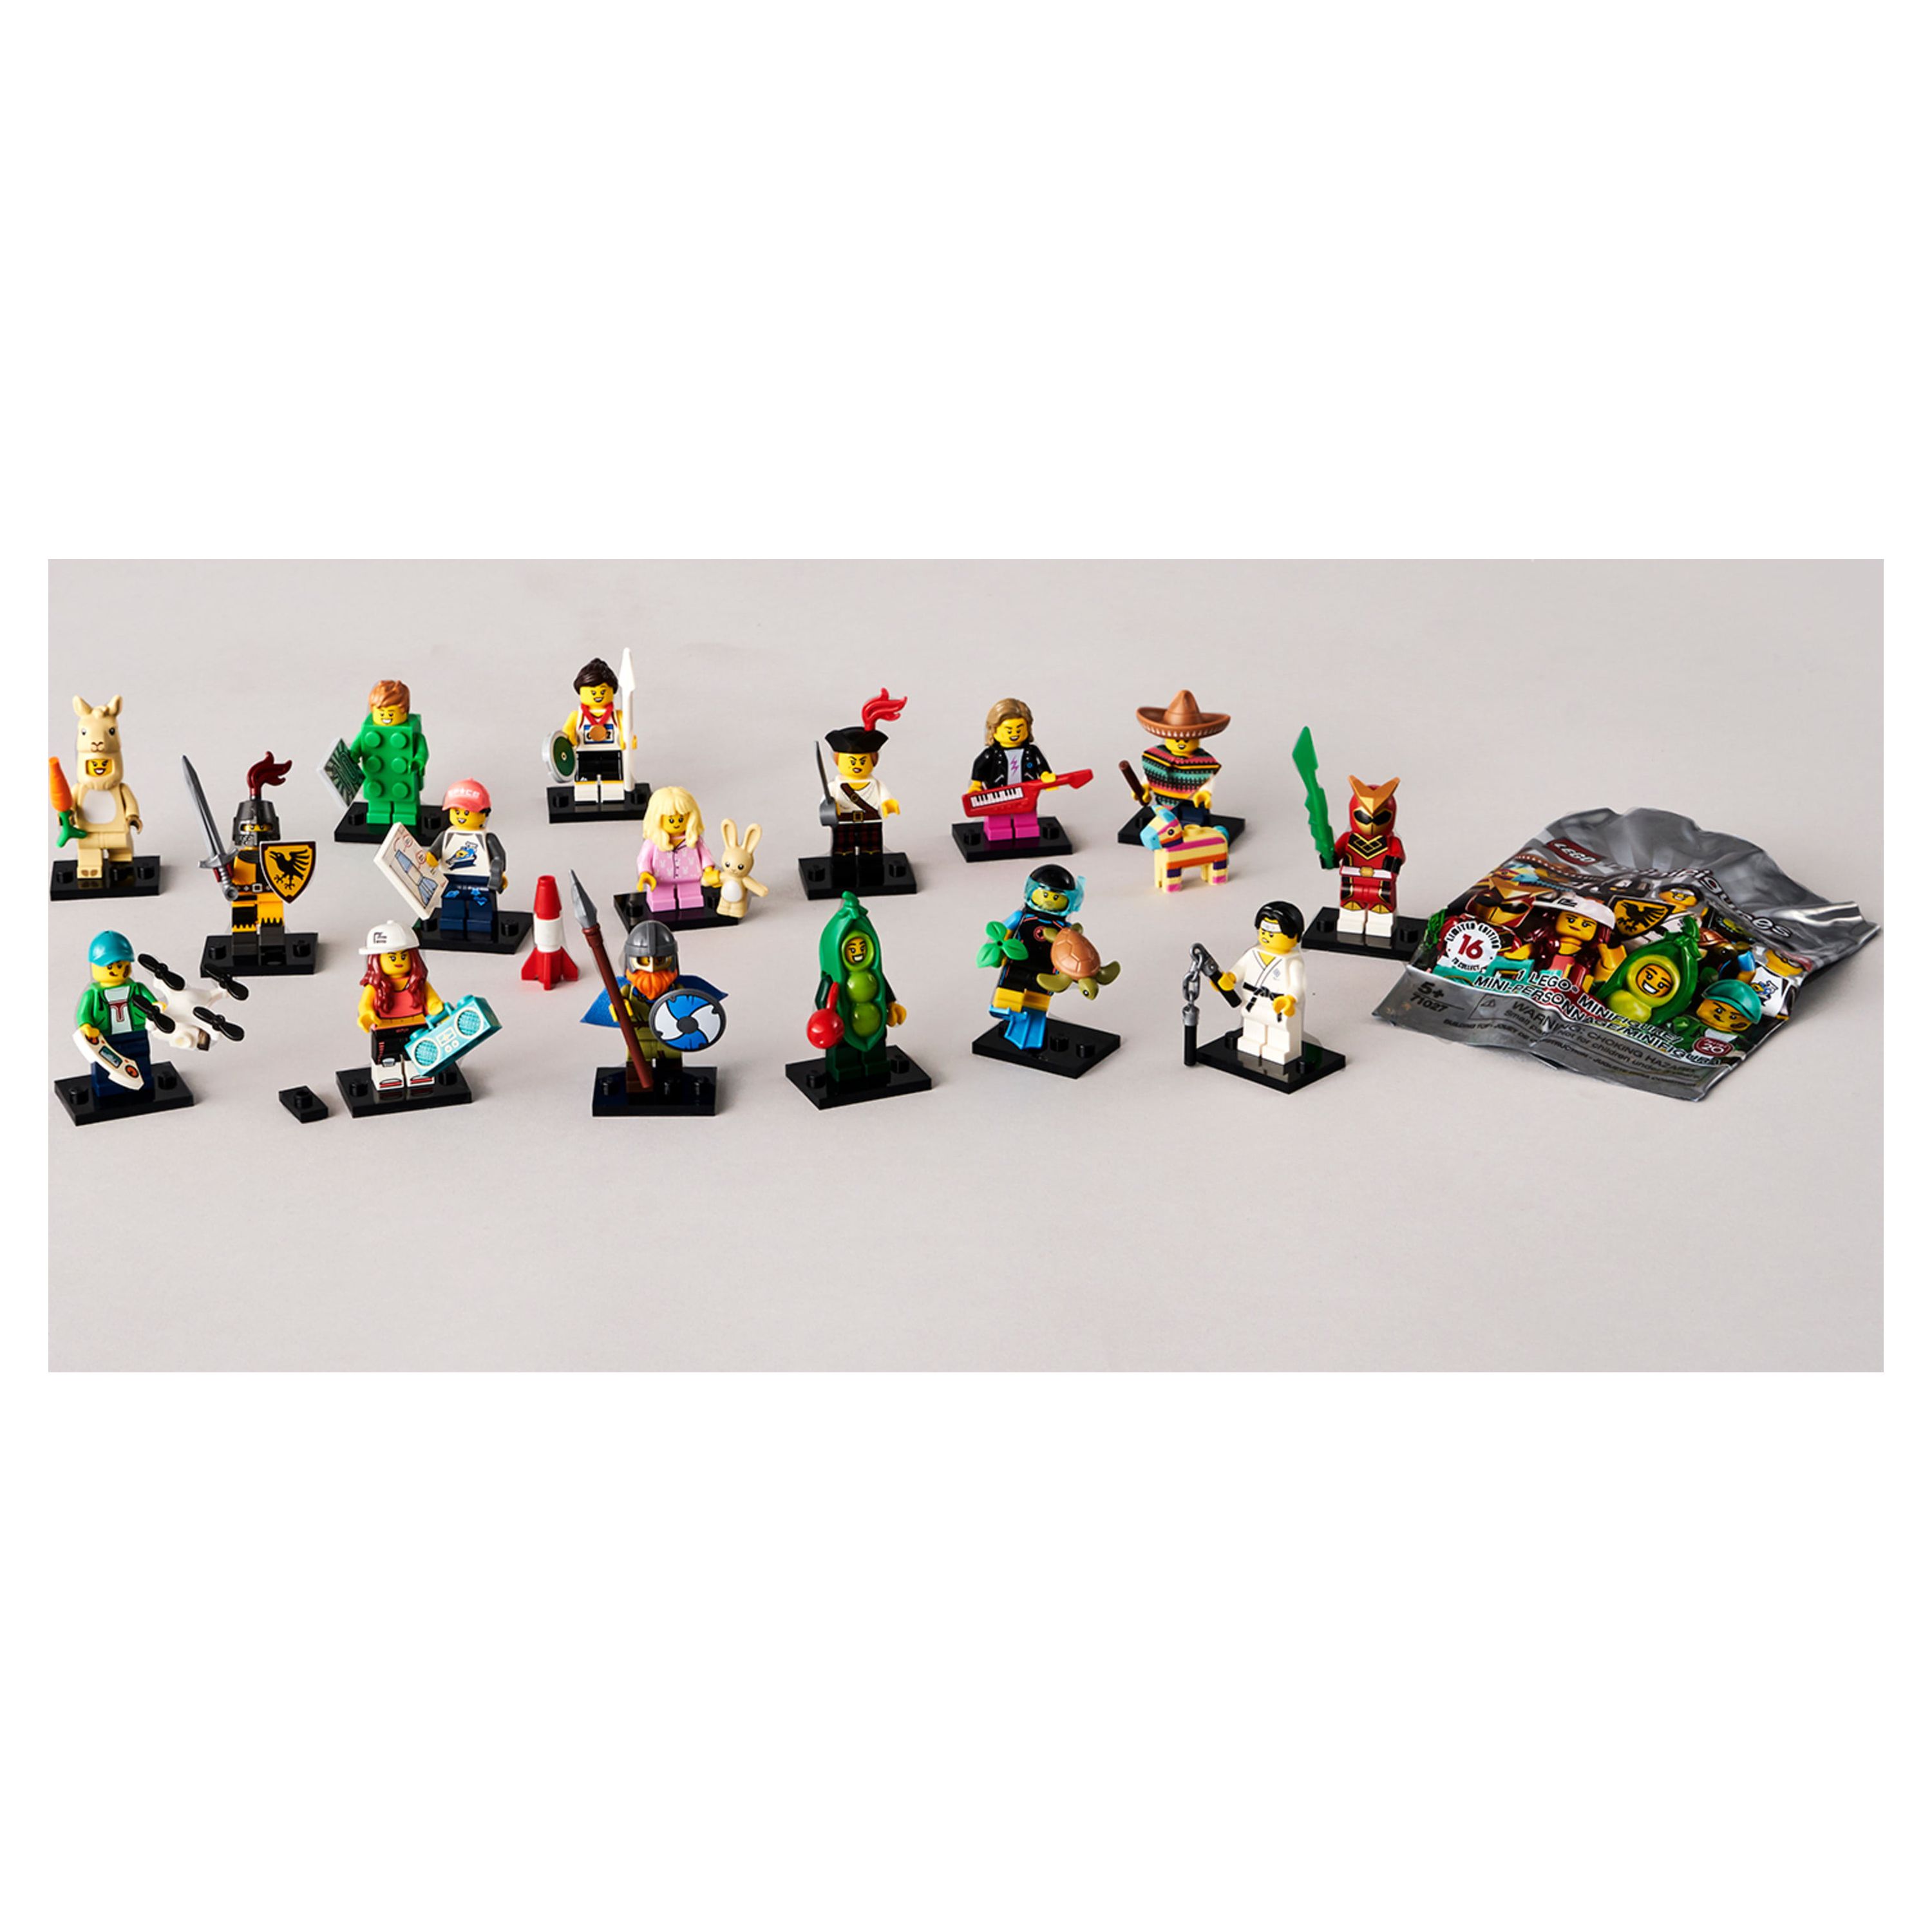 LEGO Minifigures Series 20 71027 Building Kit (1 of 16 to Collect), featuring Characters to Collect and Add to Existing Sets - image 5 of 5